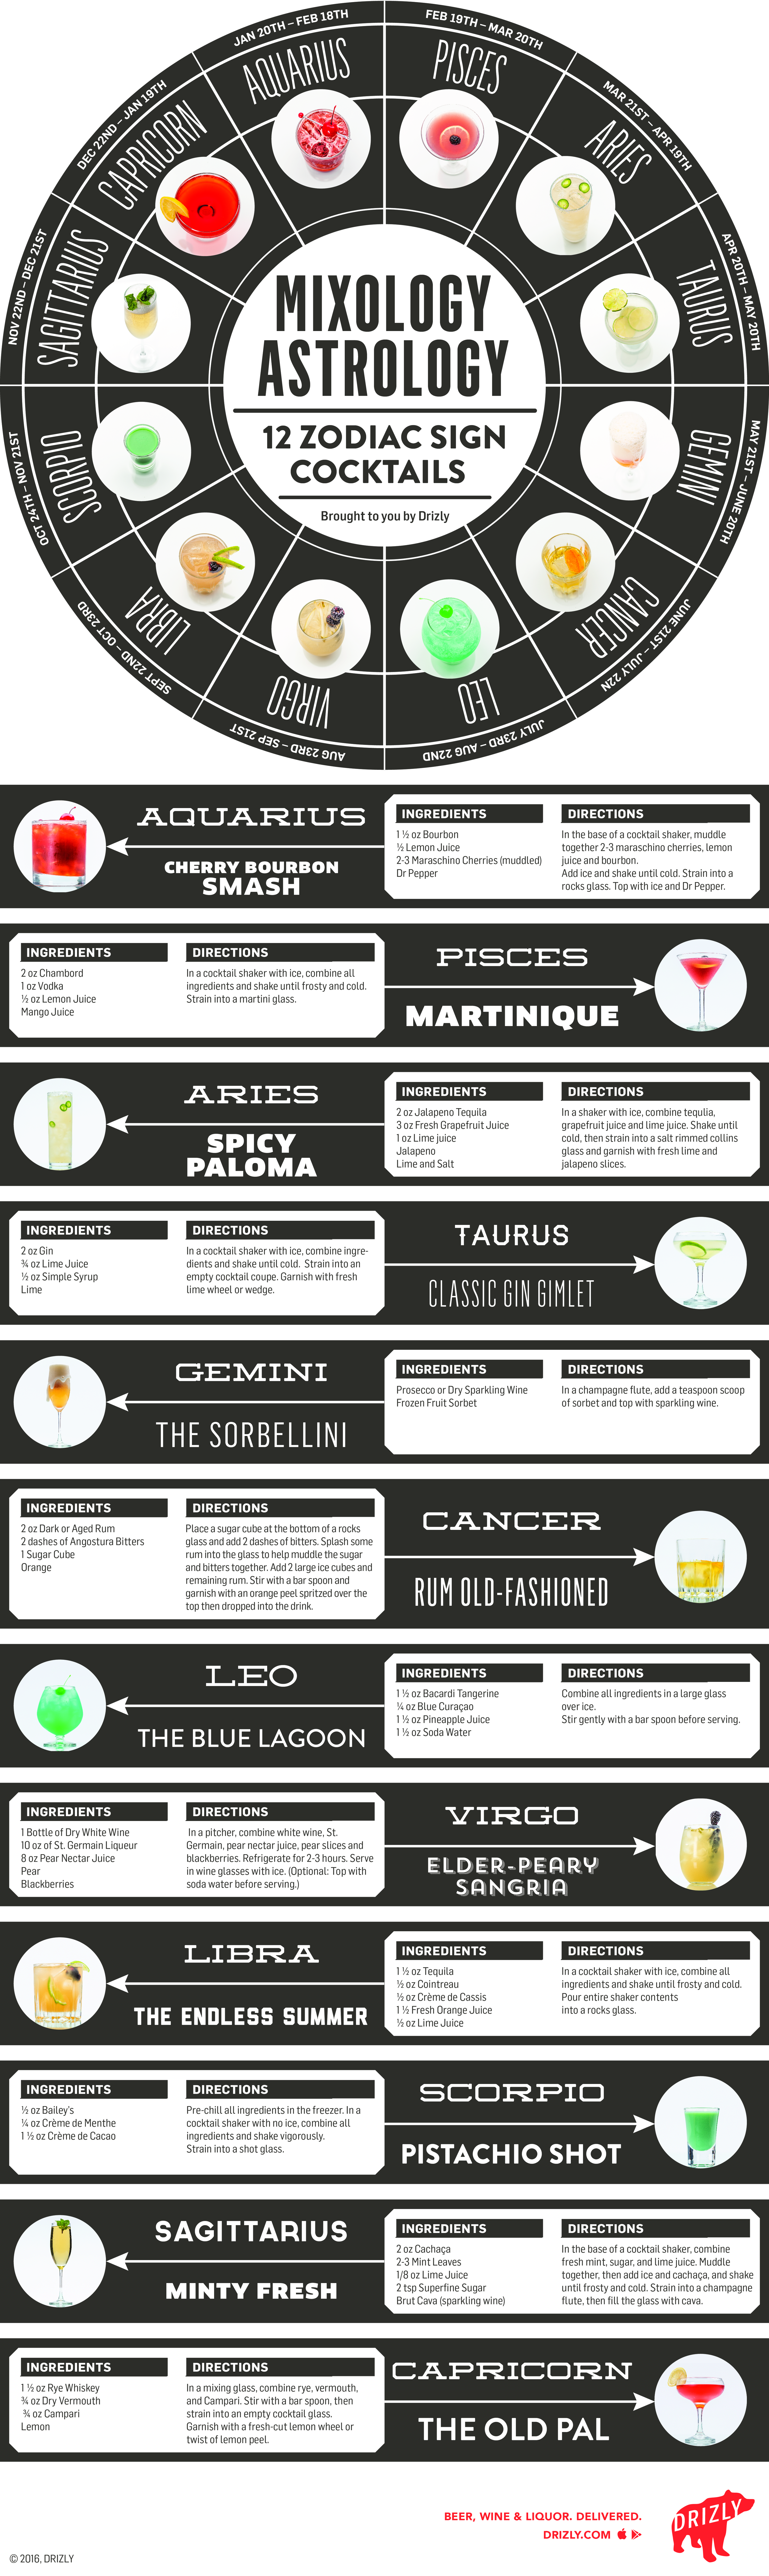 Drizly Mixology Astrology Full Infographic